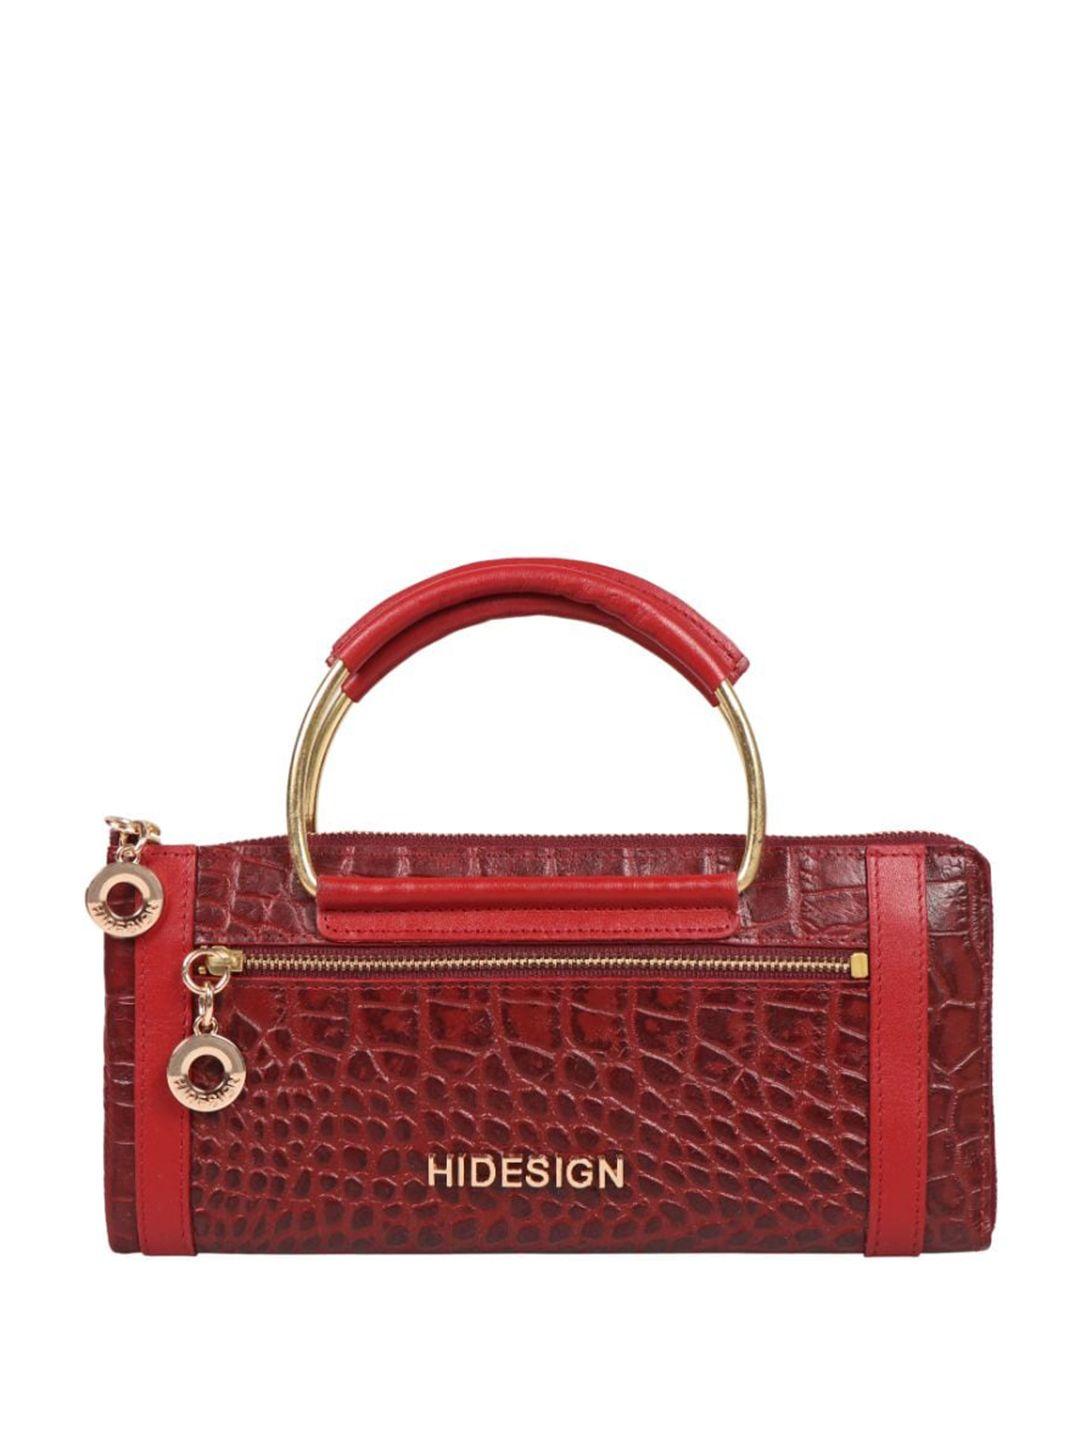 hidesign textured leather envelope clutch